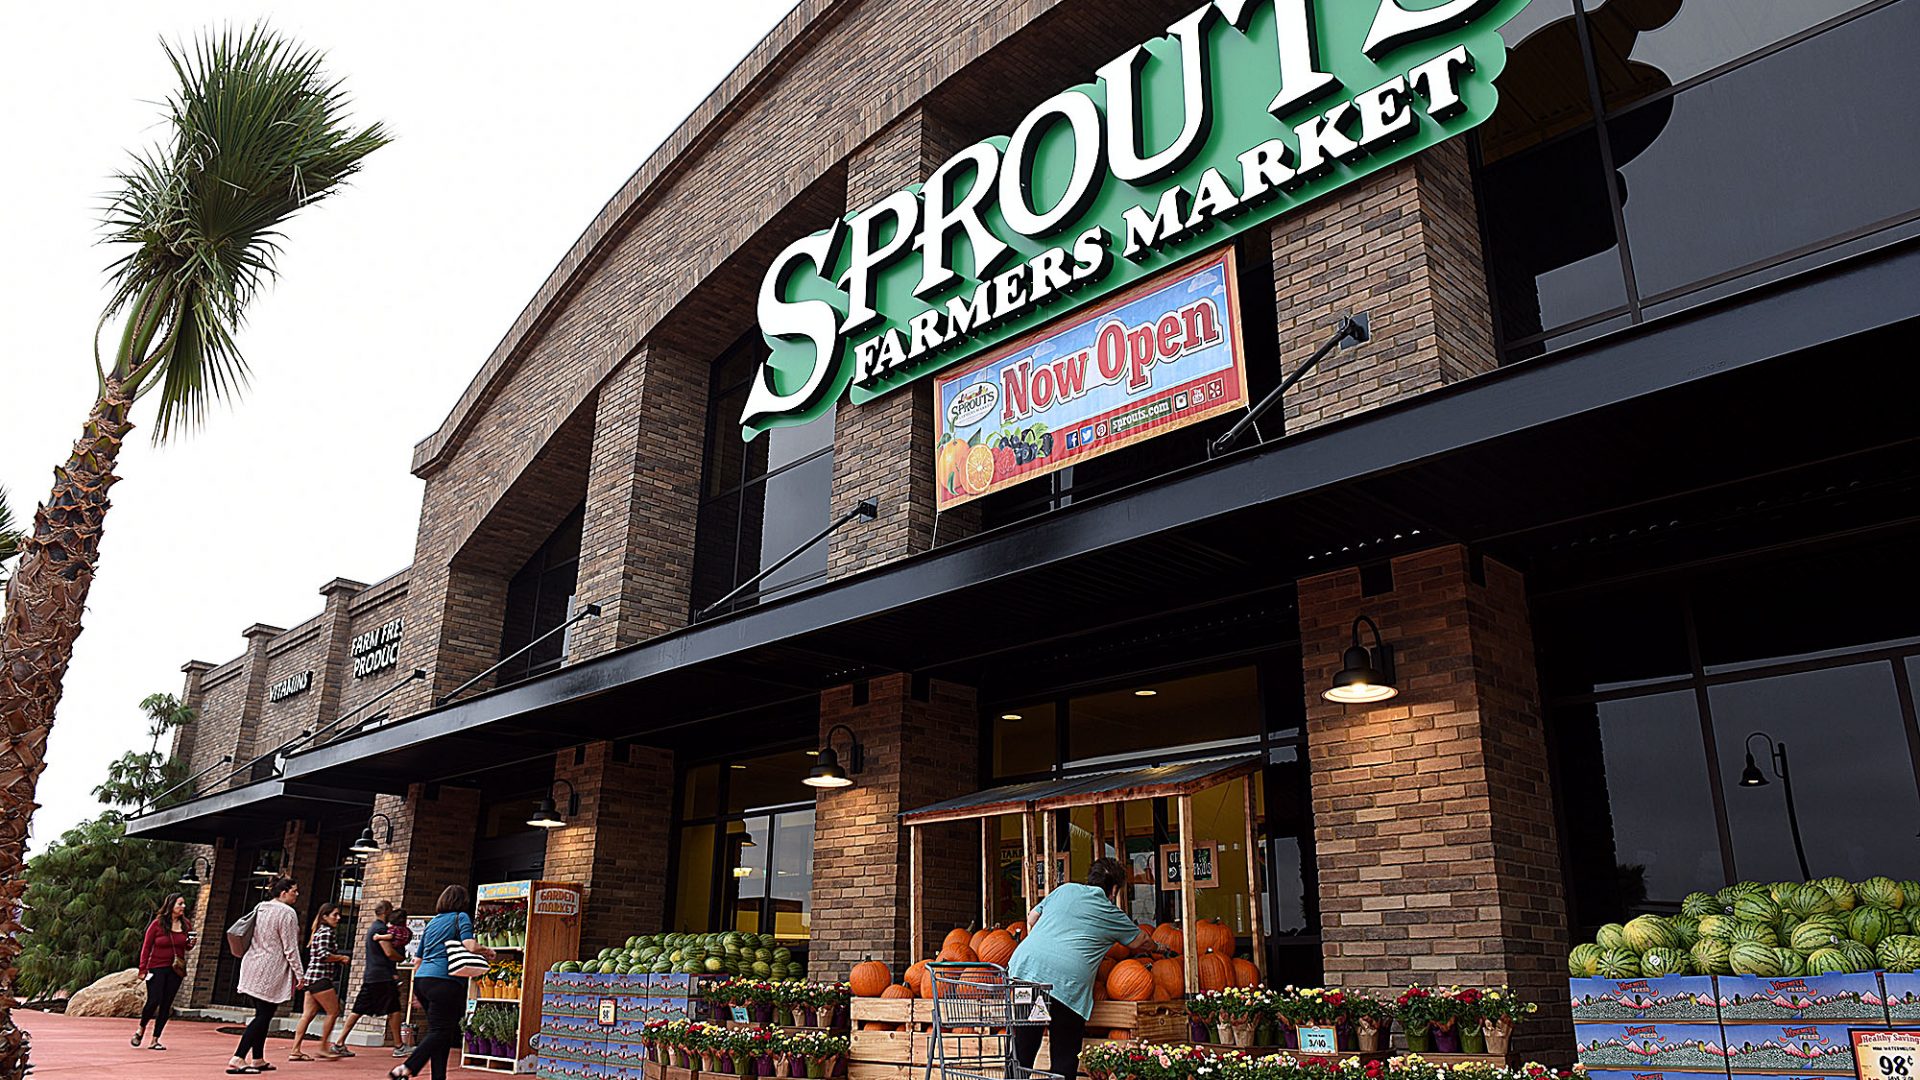 Sprouts Farmers Market celebrated their Redlands grand opening Wednesday, September 20, 2017. The 30,000-square-foot store, is the anchor tenant in Packing House District at Eureka Street and the 10 Freeway. PetSmart, Luna Grill and Chronic Tacos are among the other anticipated tenants. (Staff photo by Rick Sforza, Redlands Daily Facts/SCNG)